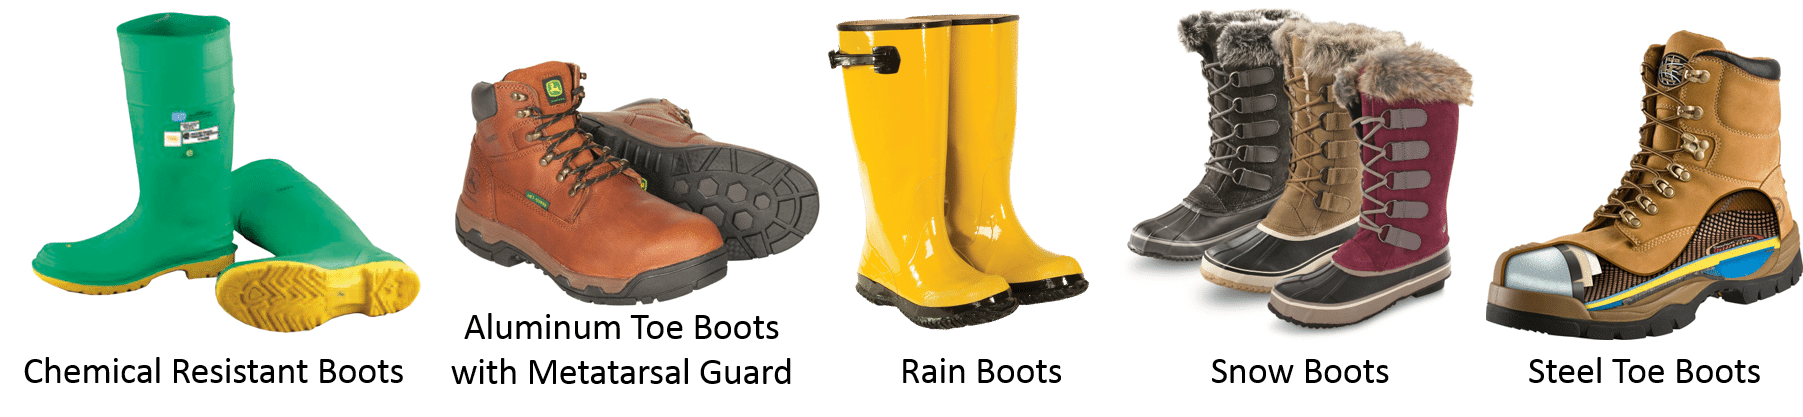 Examples of different shoes used for personal protection